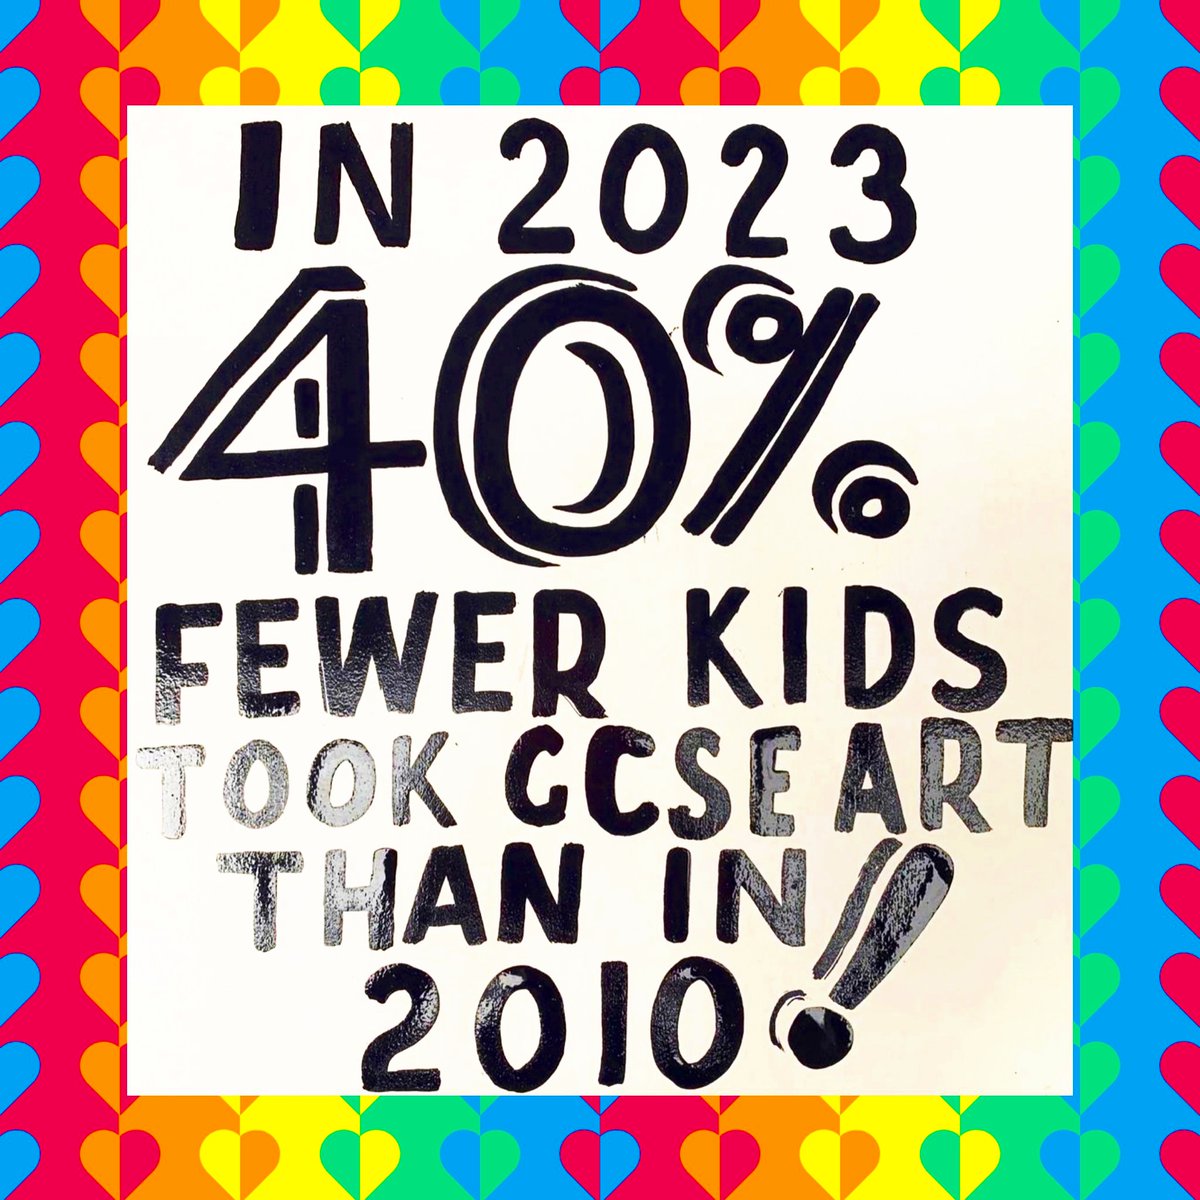 FOLLOW YOUR HE-ART: just read this sad statistic (via @HollyLTucker/@BobandRoberta). Without the opportunity to explore creativity, there would be no @ceramicaclaygate, a place where so many of you love to come & escape through art; if ART is where your HE-ART is, FOLLOW IT! ♥️